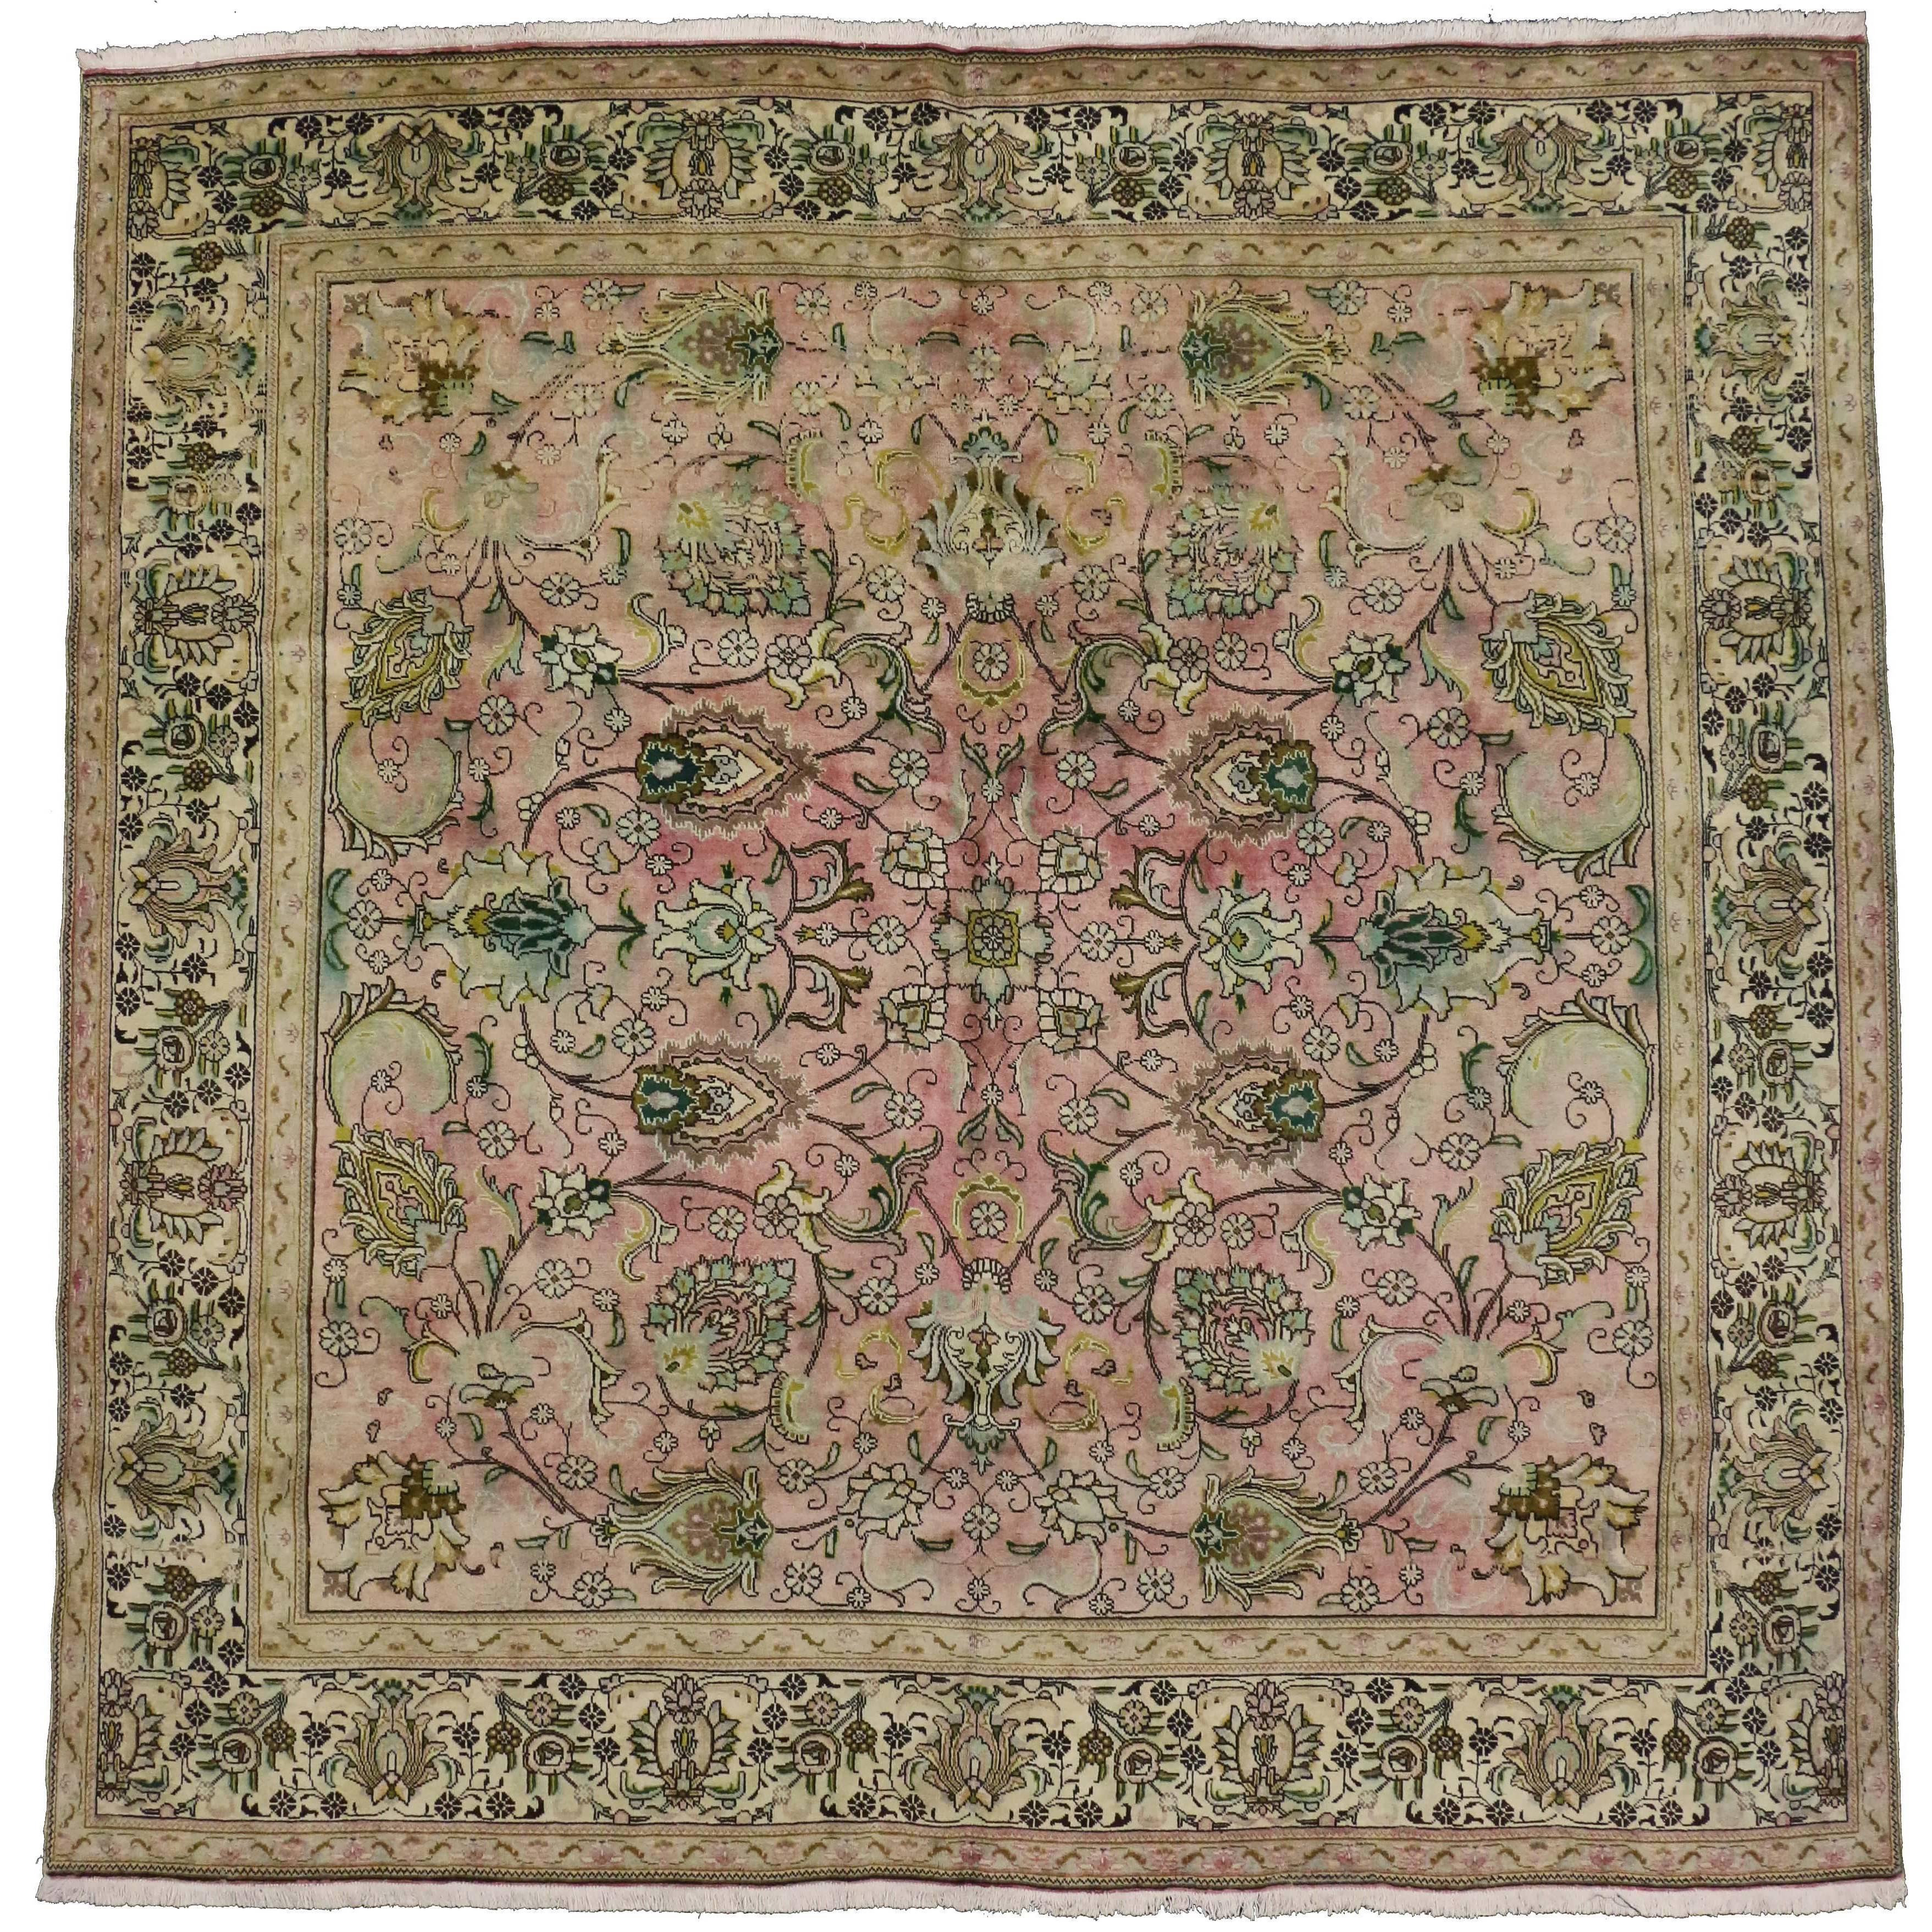 Vintage Persian Tabriz Square Area Rug with French Provincial Georgian Style